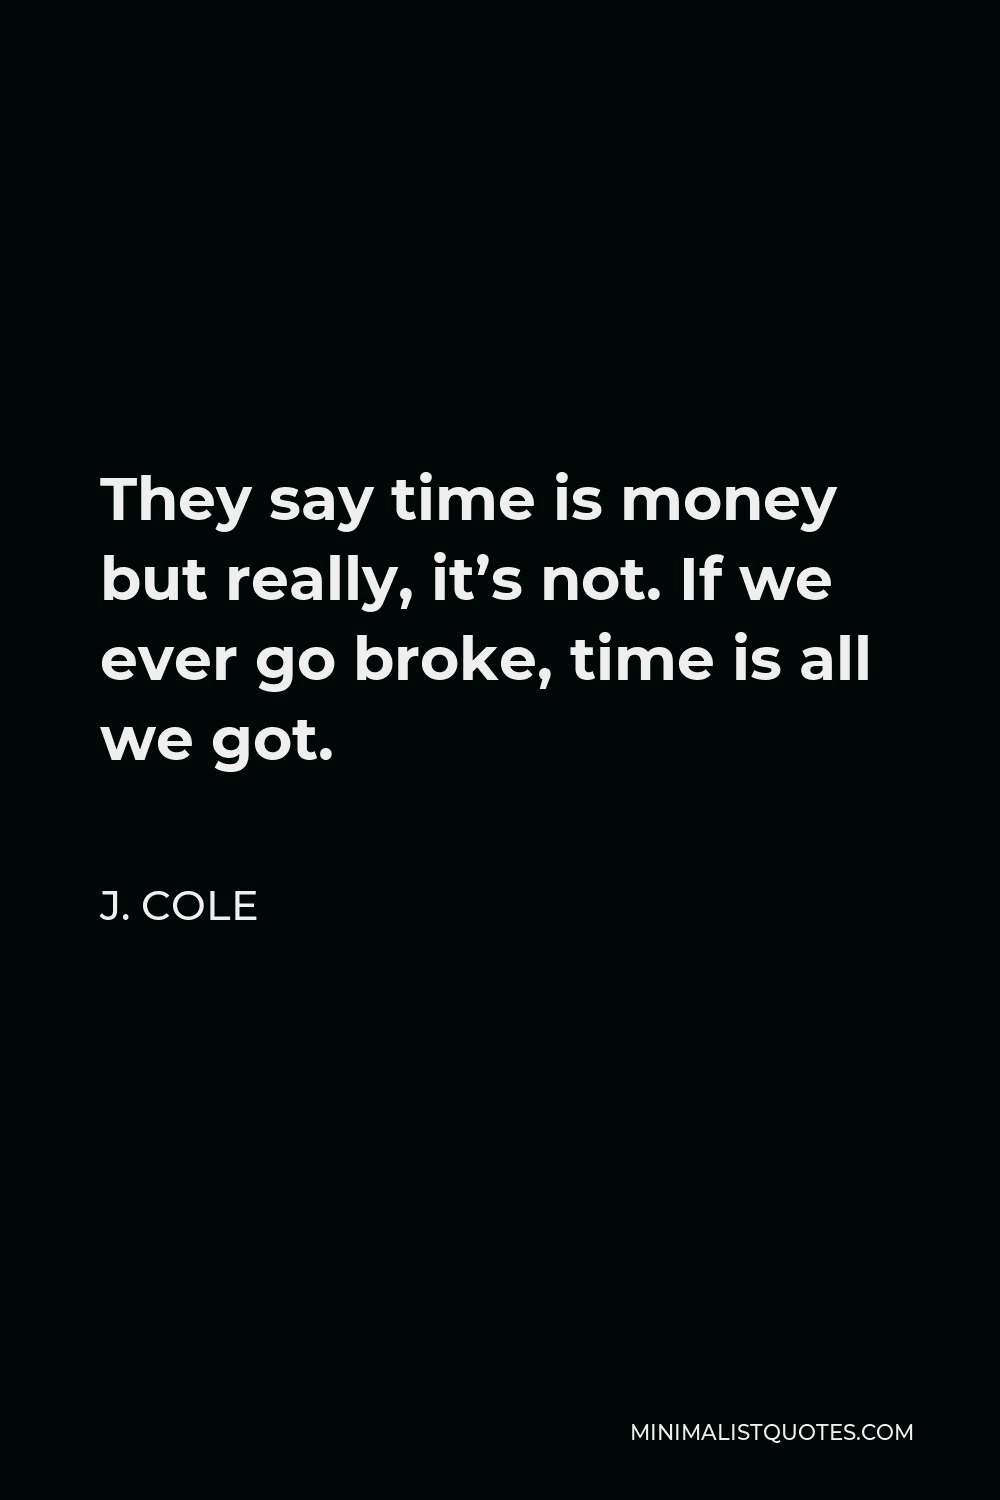 J Cole Quote They Say Time Is Money But Really It S Not If We Ever Go Broke Time Is All We Got